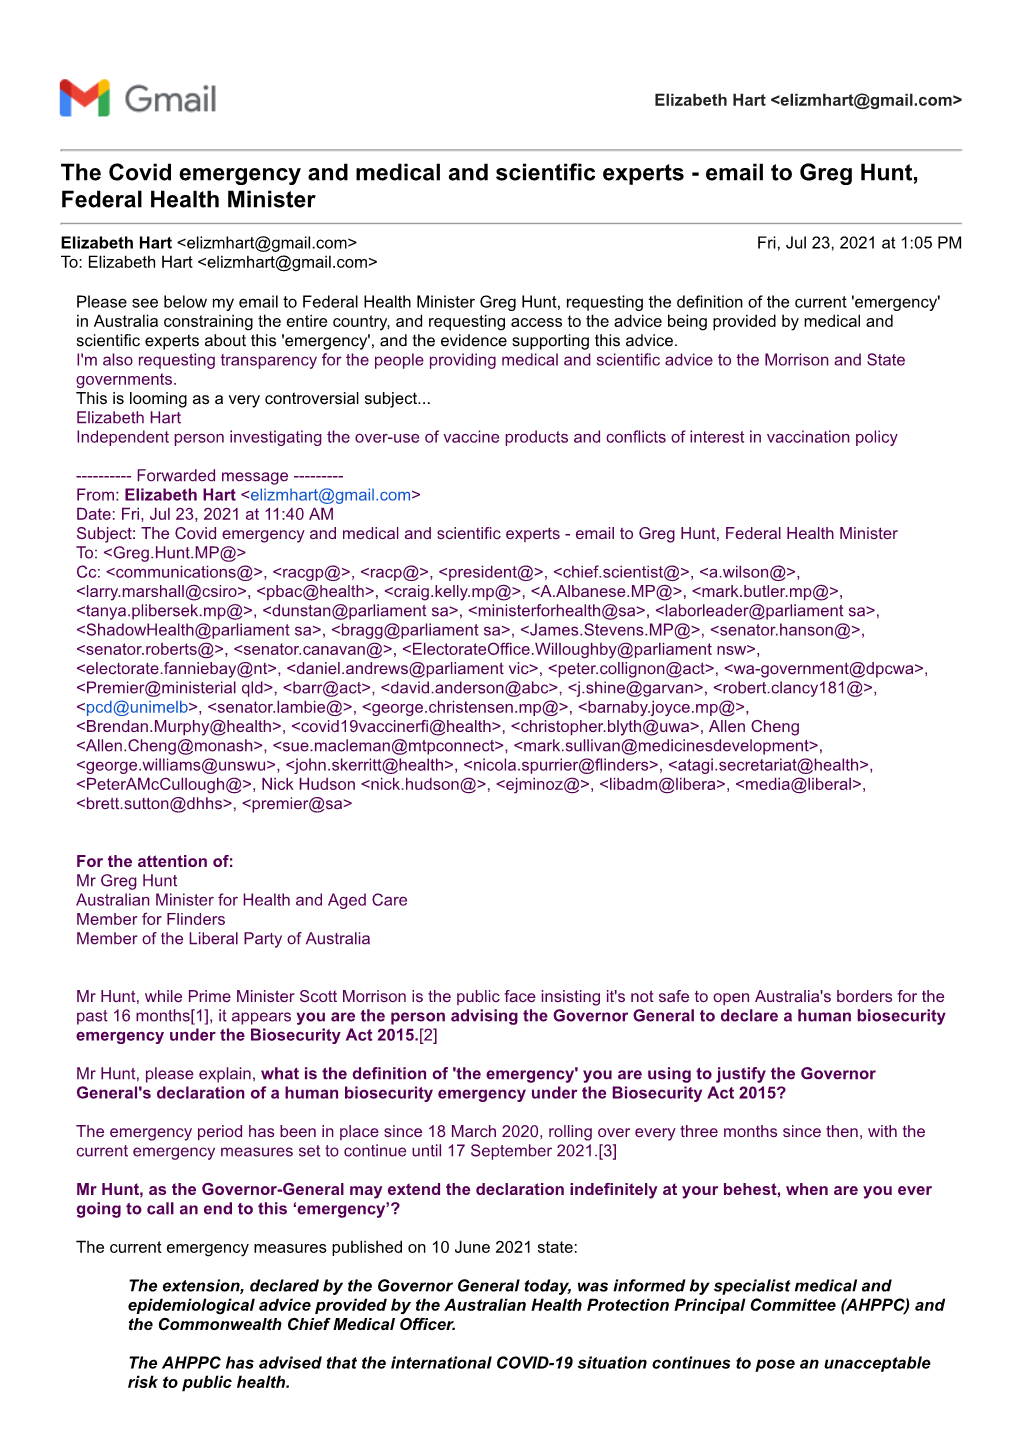 The Covid Emergency and Medical and Scientific Experts - Email to Greg Hunt, Federal Health Minister